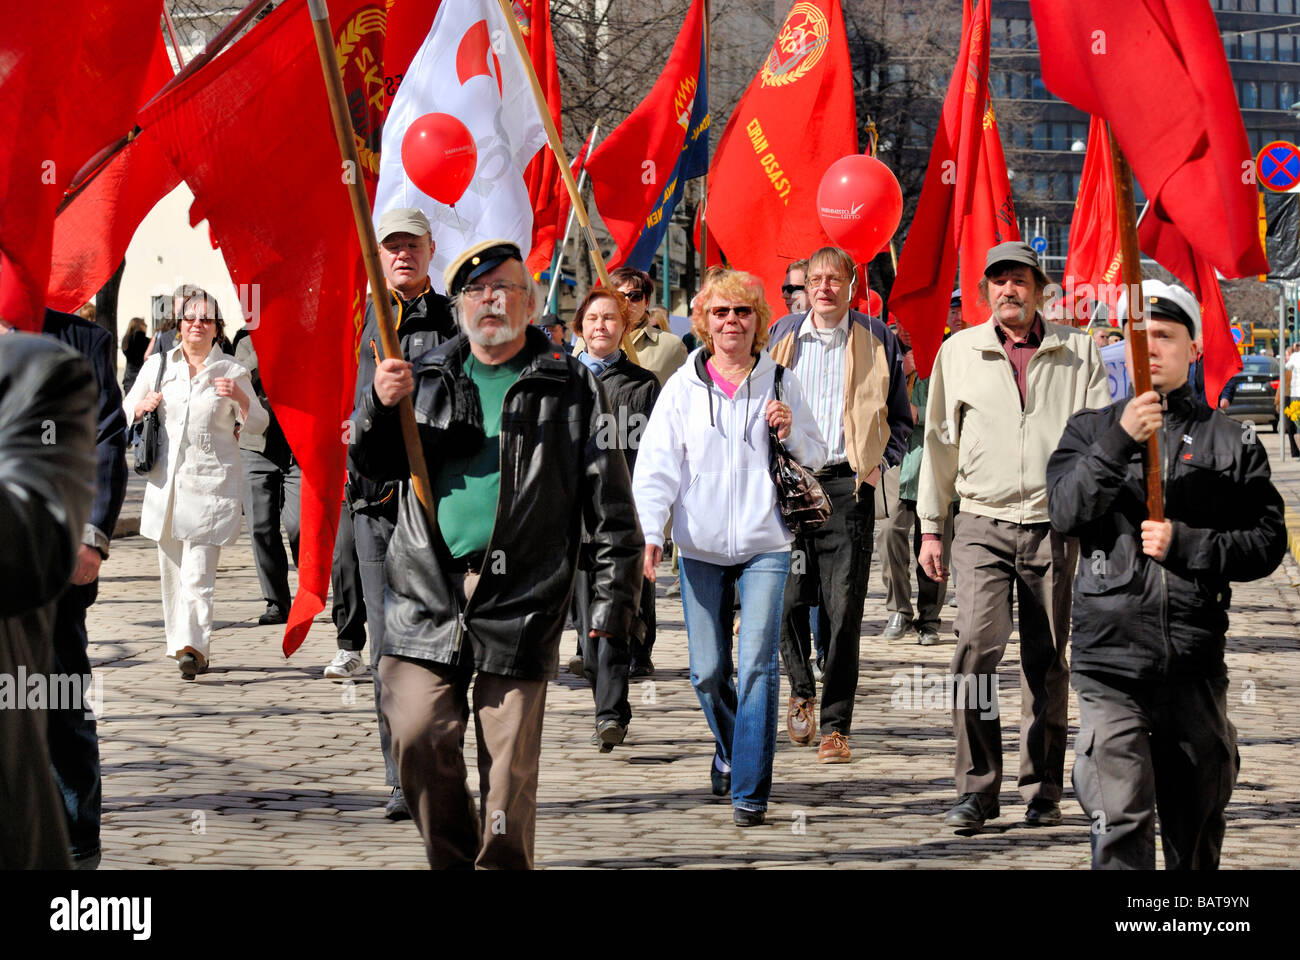 The Finnish Communist Party, SKP, May Day parade with the red flags at the Esplanade, Helsinki, Finland, Scandinavia, Europe. Stock Photo